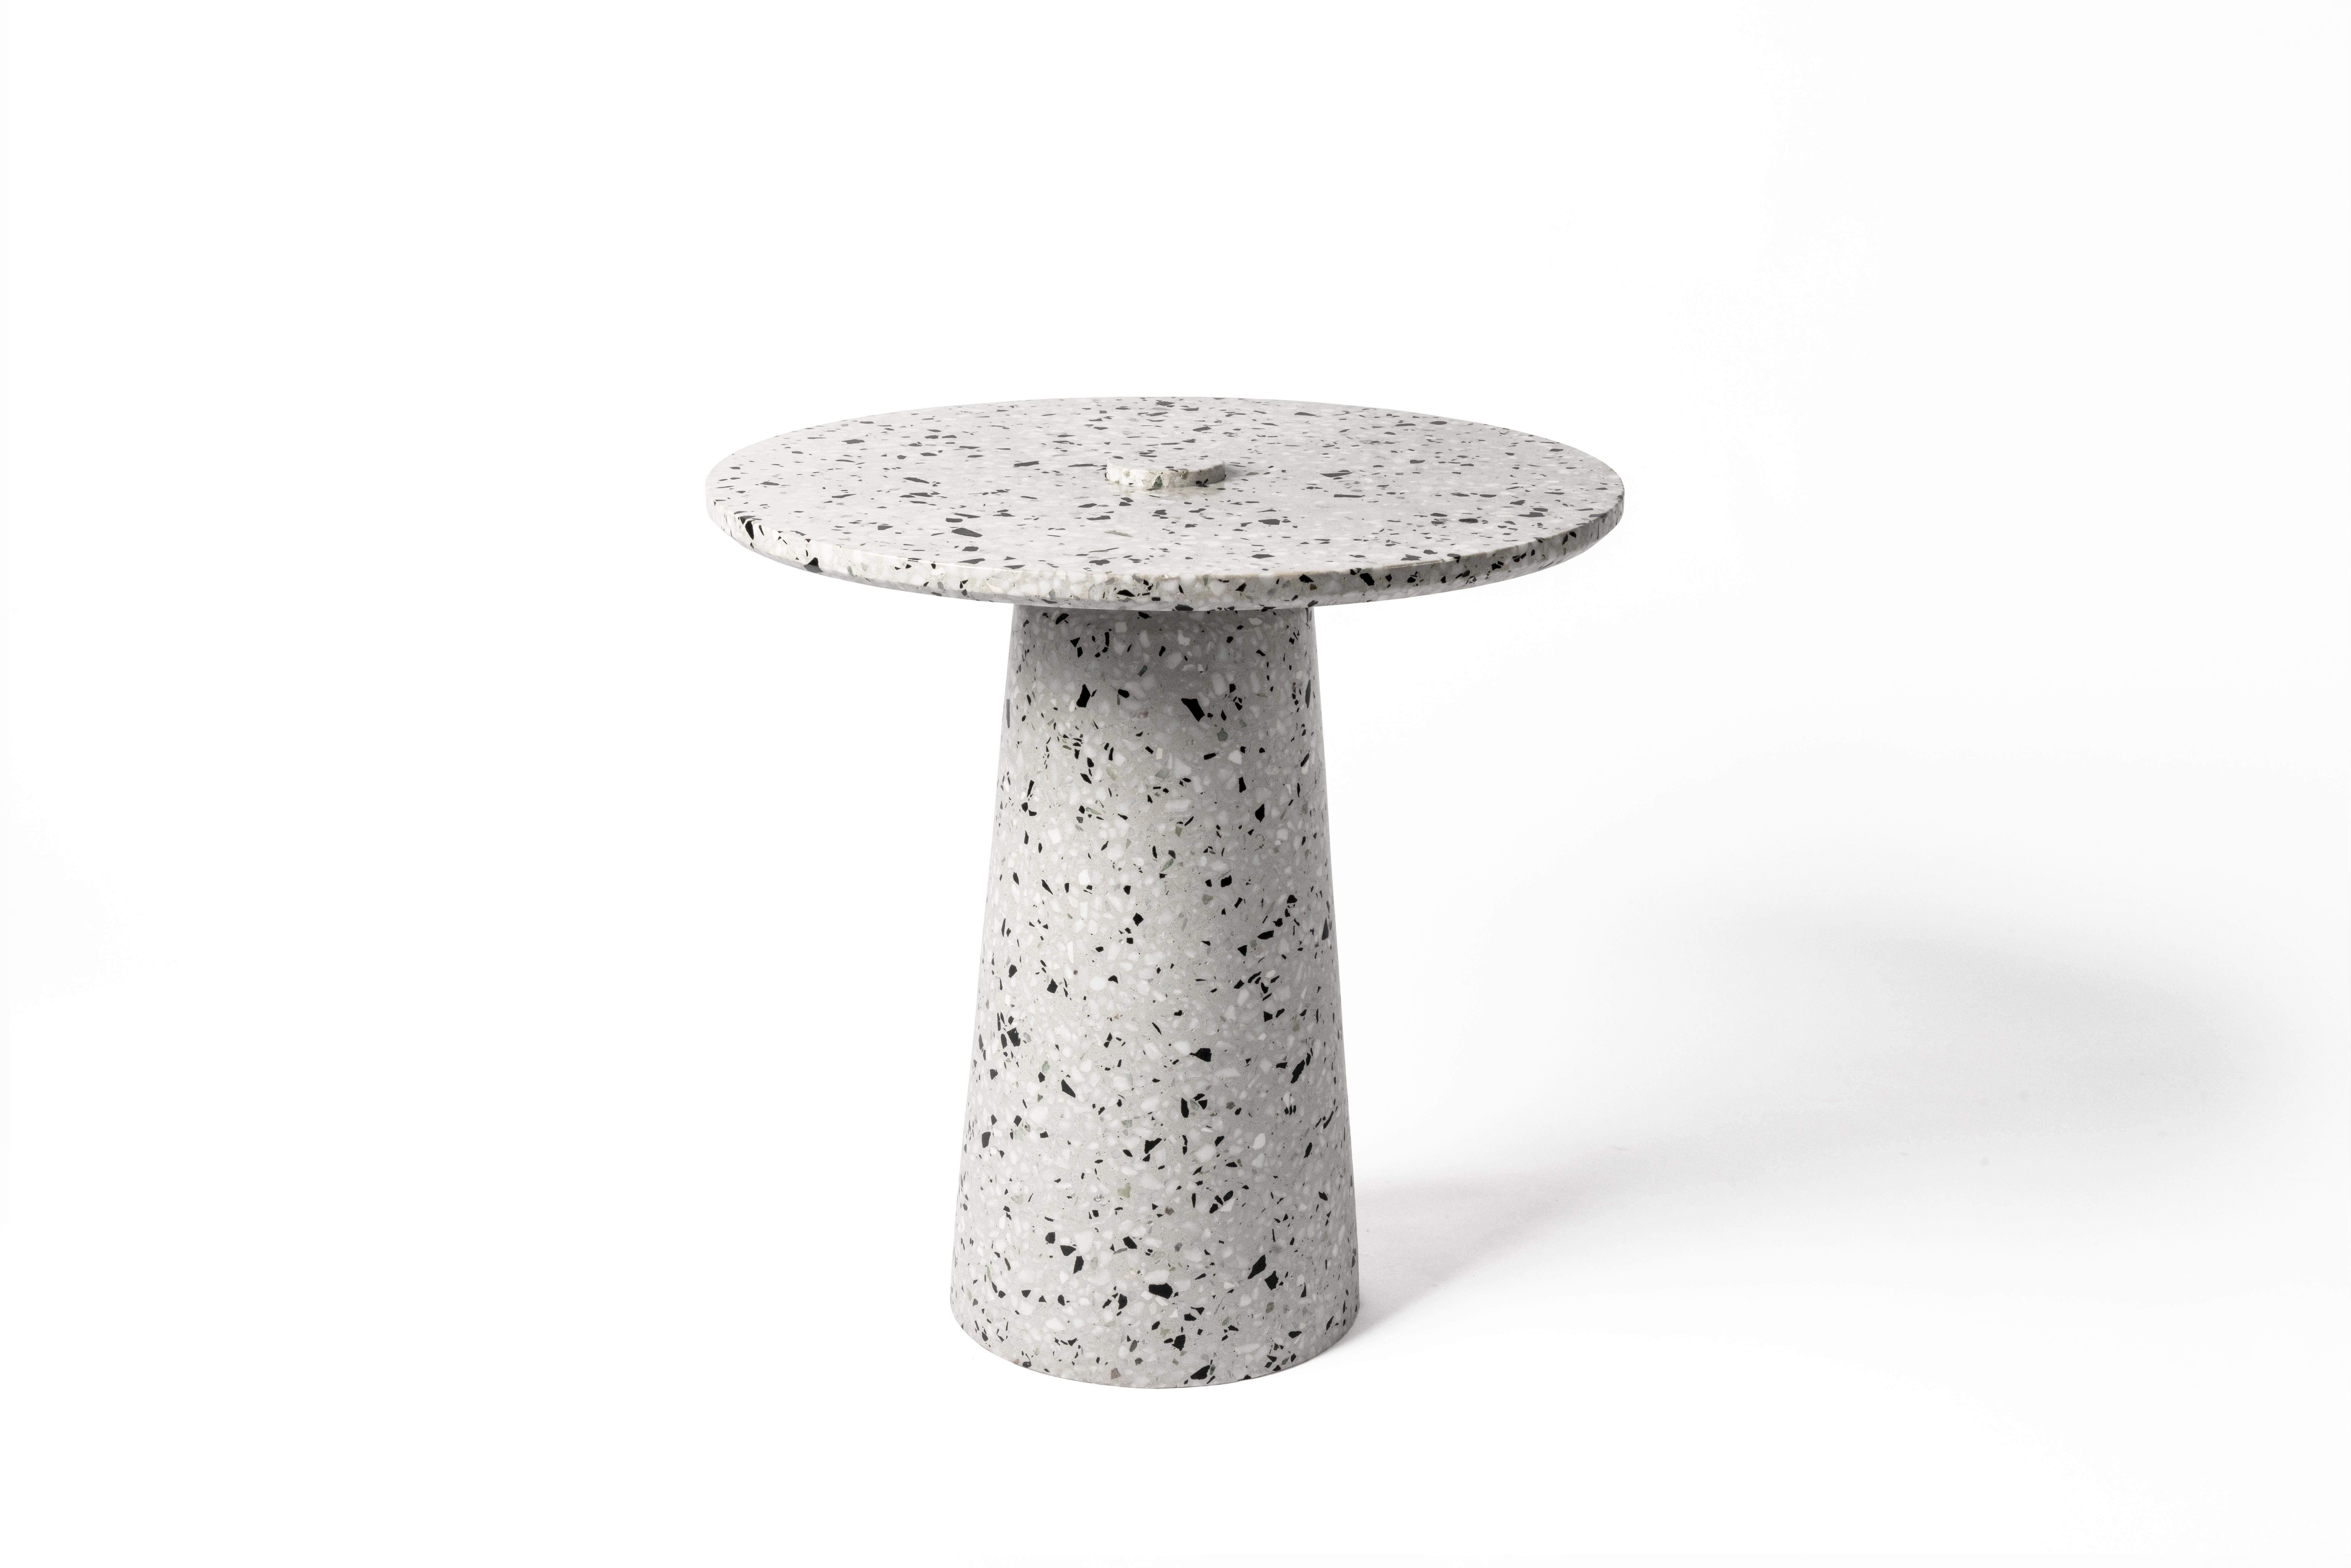 Material: Concrete, leftover stone aggregate
Size: Ø 500 x H 503 mm
Weight: 31.5 kg
Color: White

About the artist/ designer:
Bentu's furniture derives its uniqueness from the simplicity of its forms and its materials of concrete. Concrete's